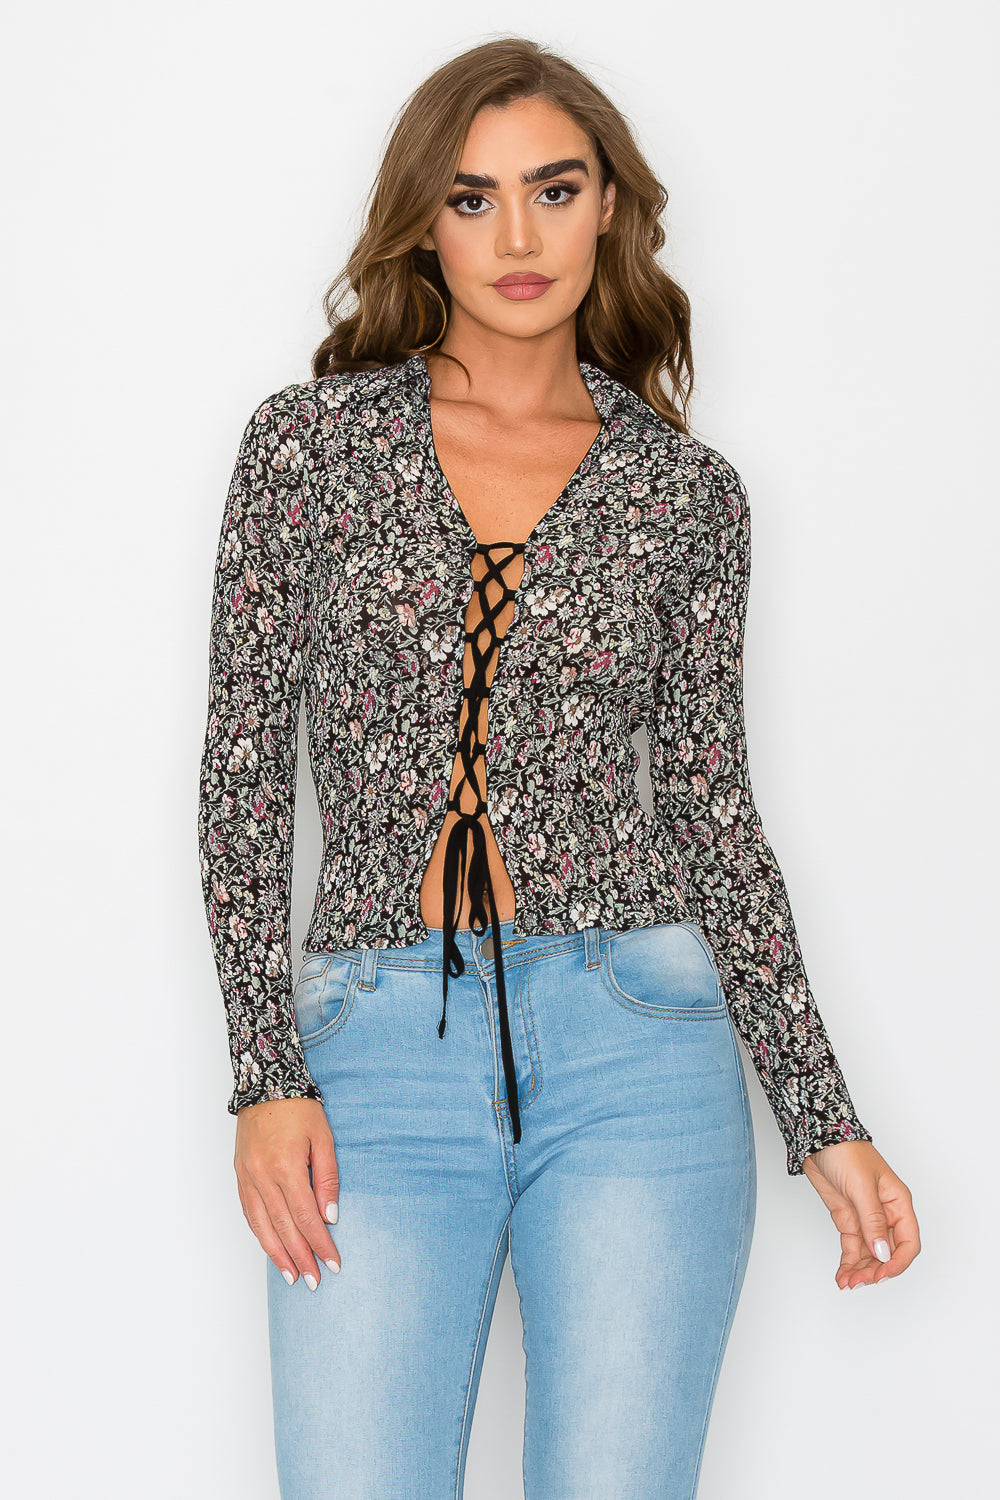 Lace up Pleated Printed Blouse